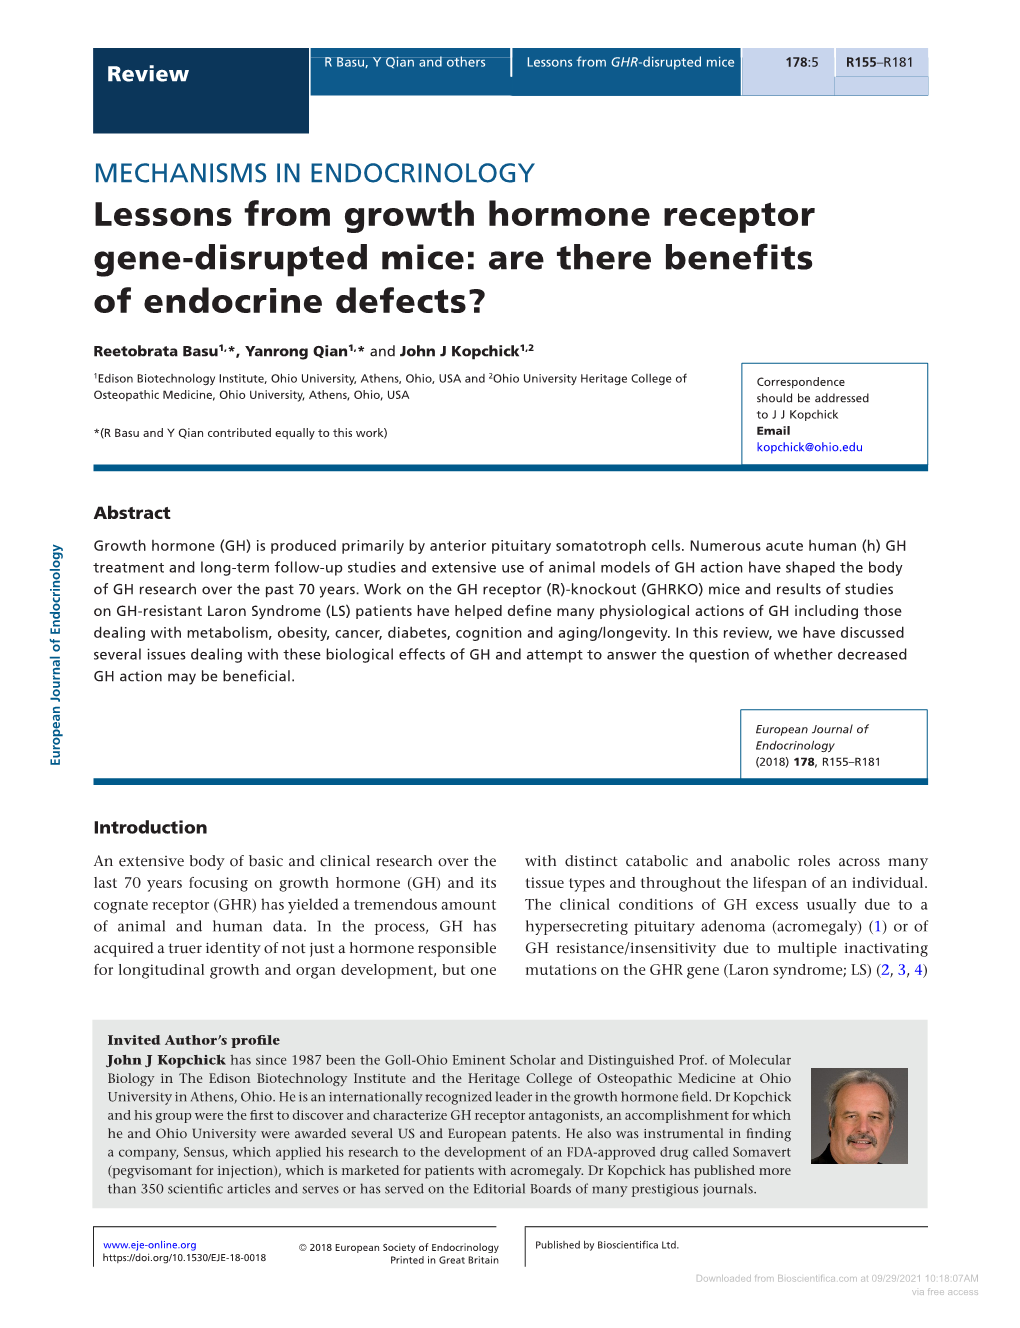 Lessons from Growth Hormone Receptor Gene-Disrupted Mice